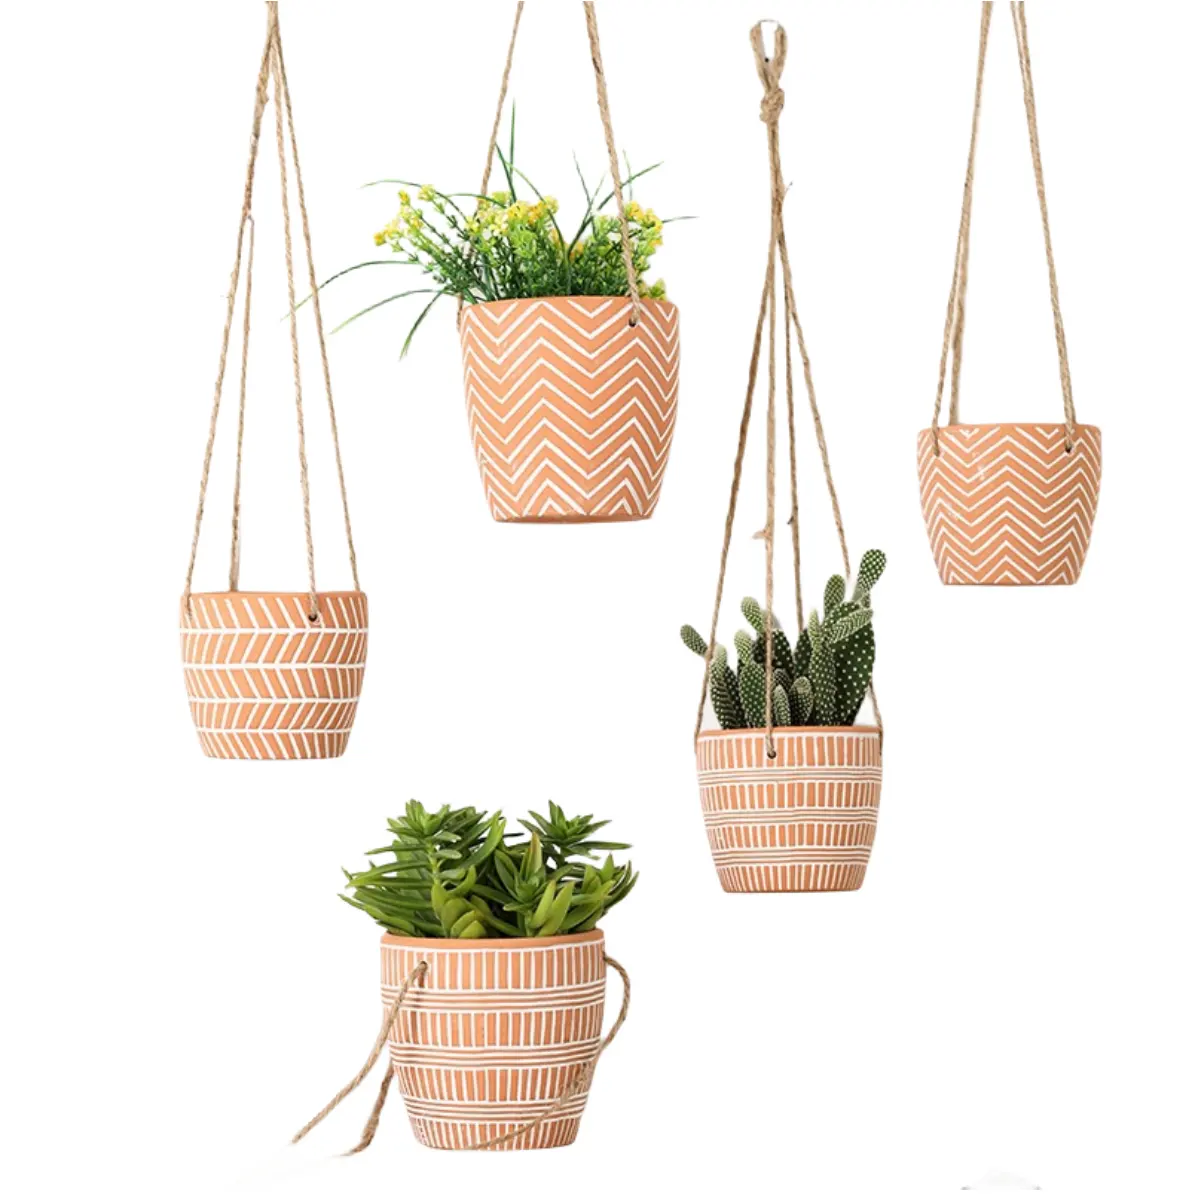 Terracotta pot Pot with Rattan Rope Hanging Planter flower pots planters, Home Wall Decor, Self-Watering Hanging Basket